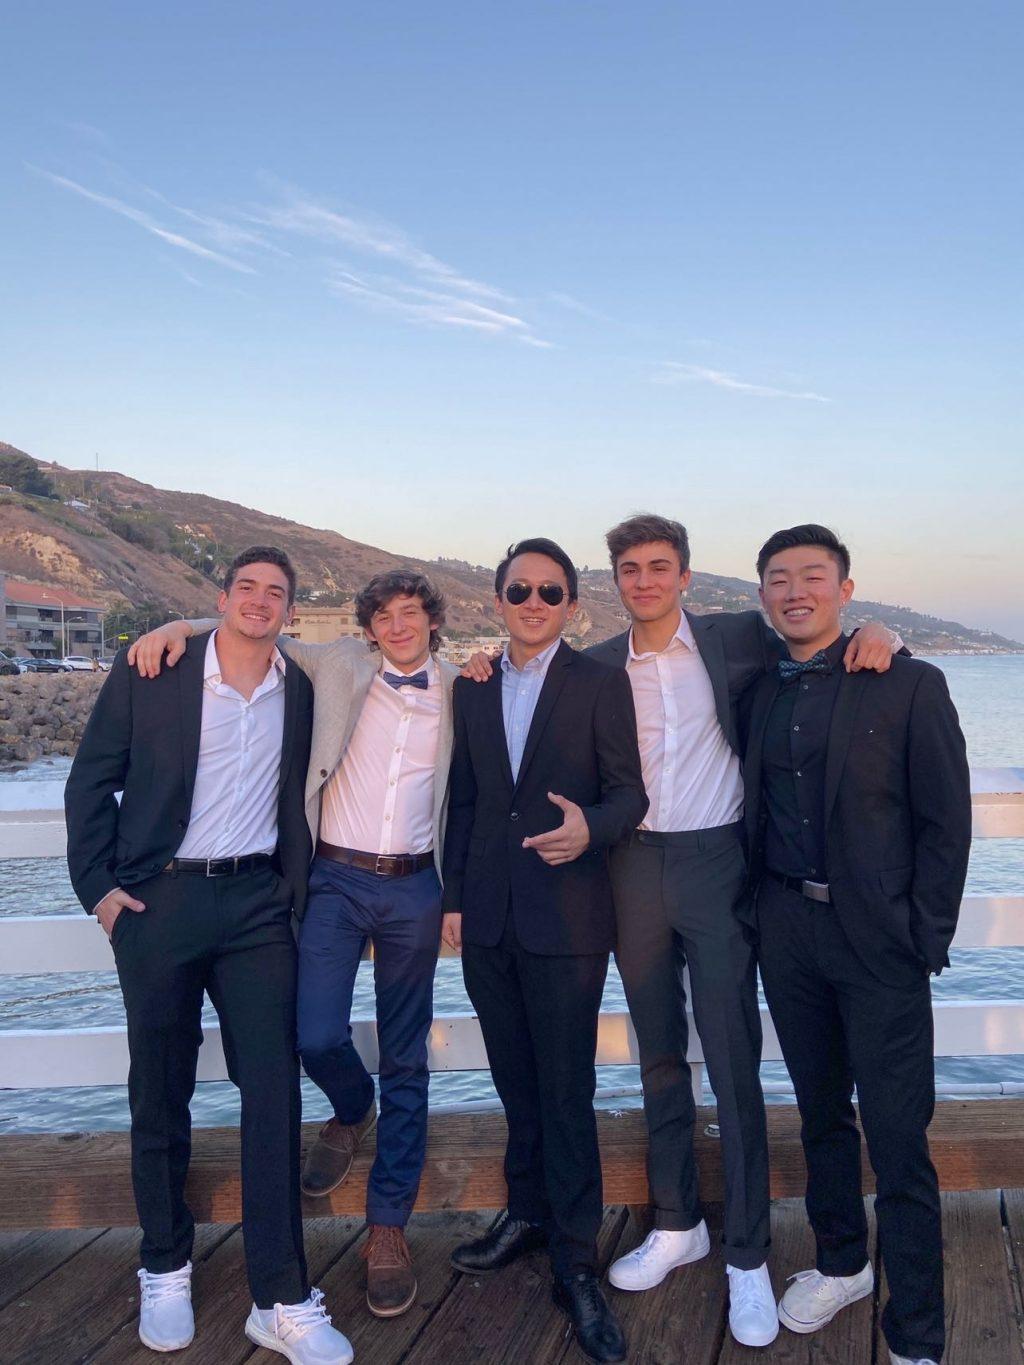 Conner poses with his Sig Ep brothers on the Malibu Pier. Conner was a member of Sig Ep since his first year at Pepperdine. Photo courtesy of Sig Ep